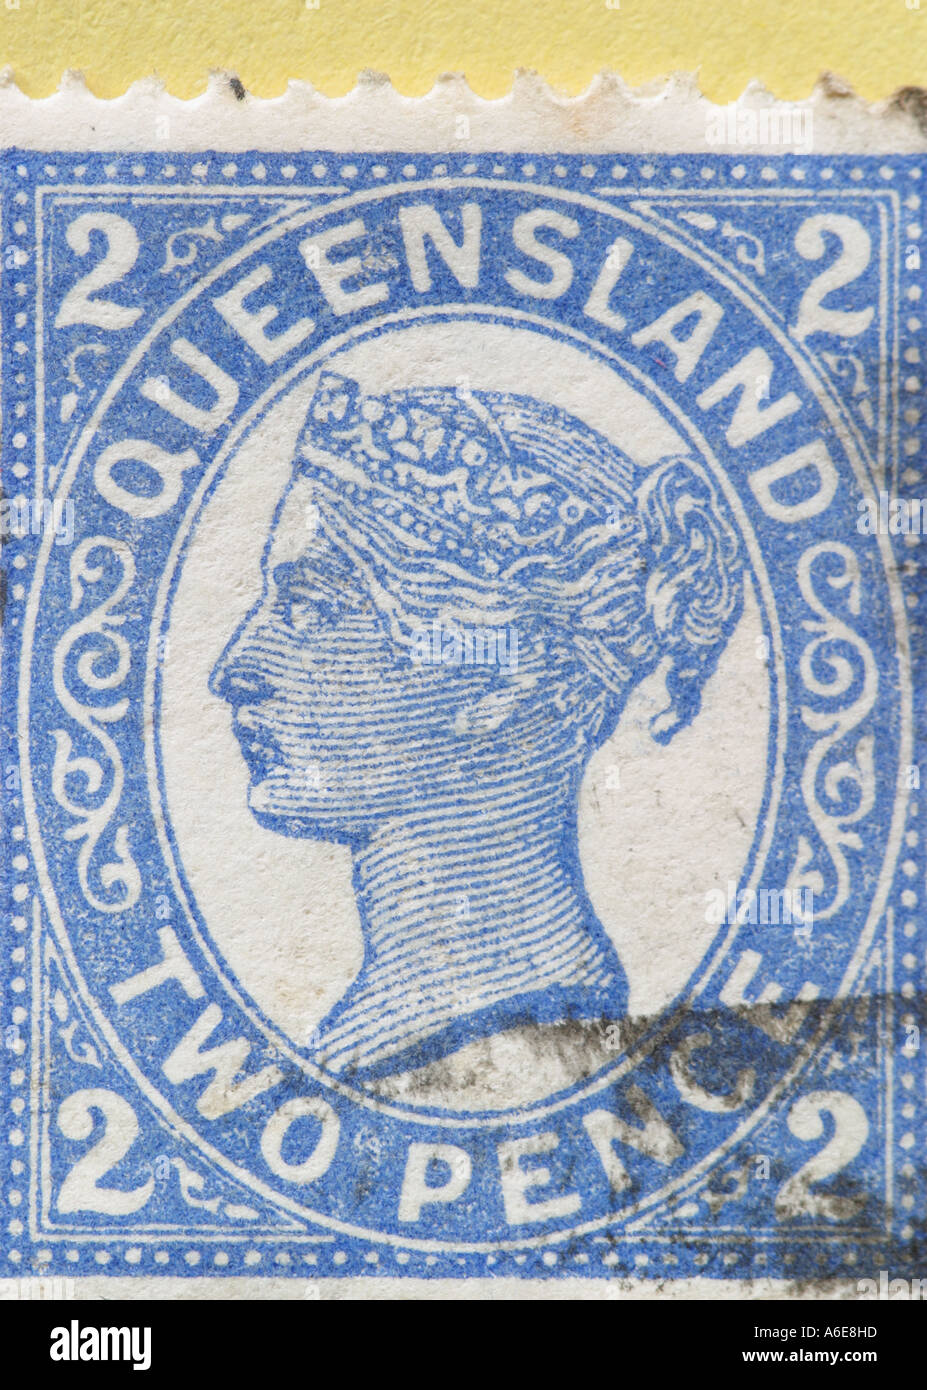 Queen Victoria stamp from the Australian state of Queensland Stock Photo